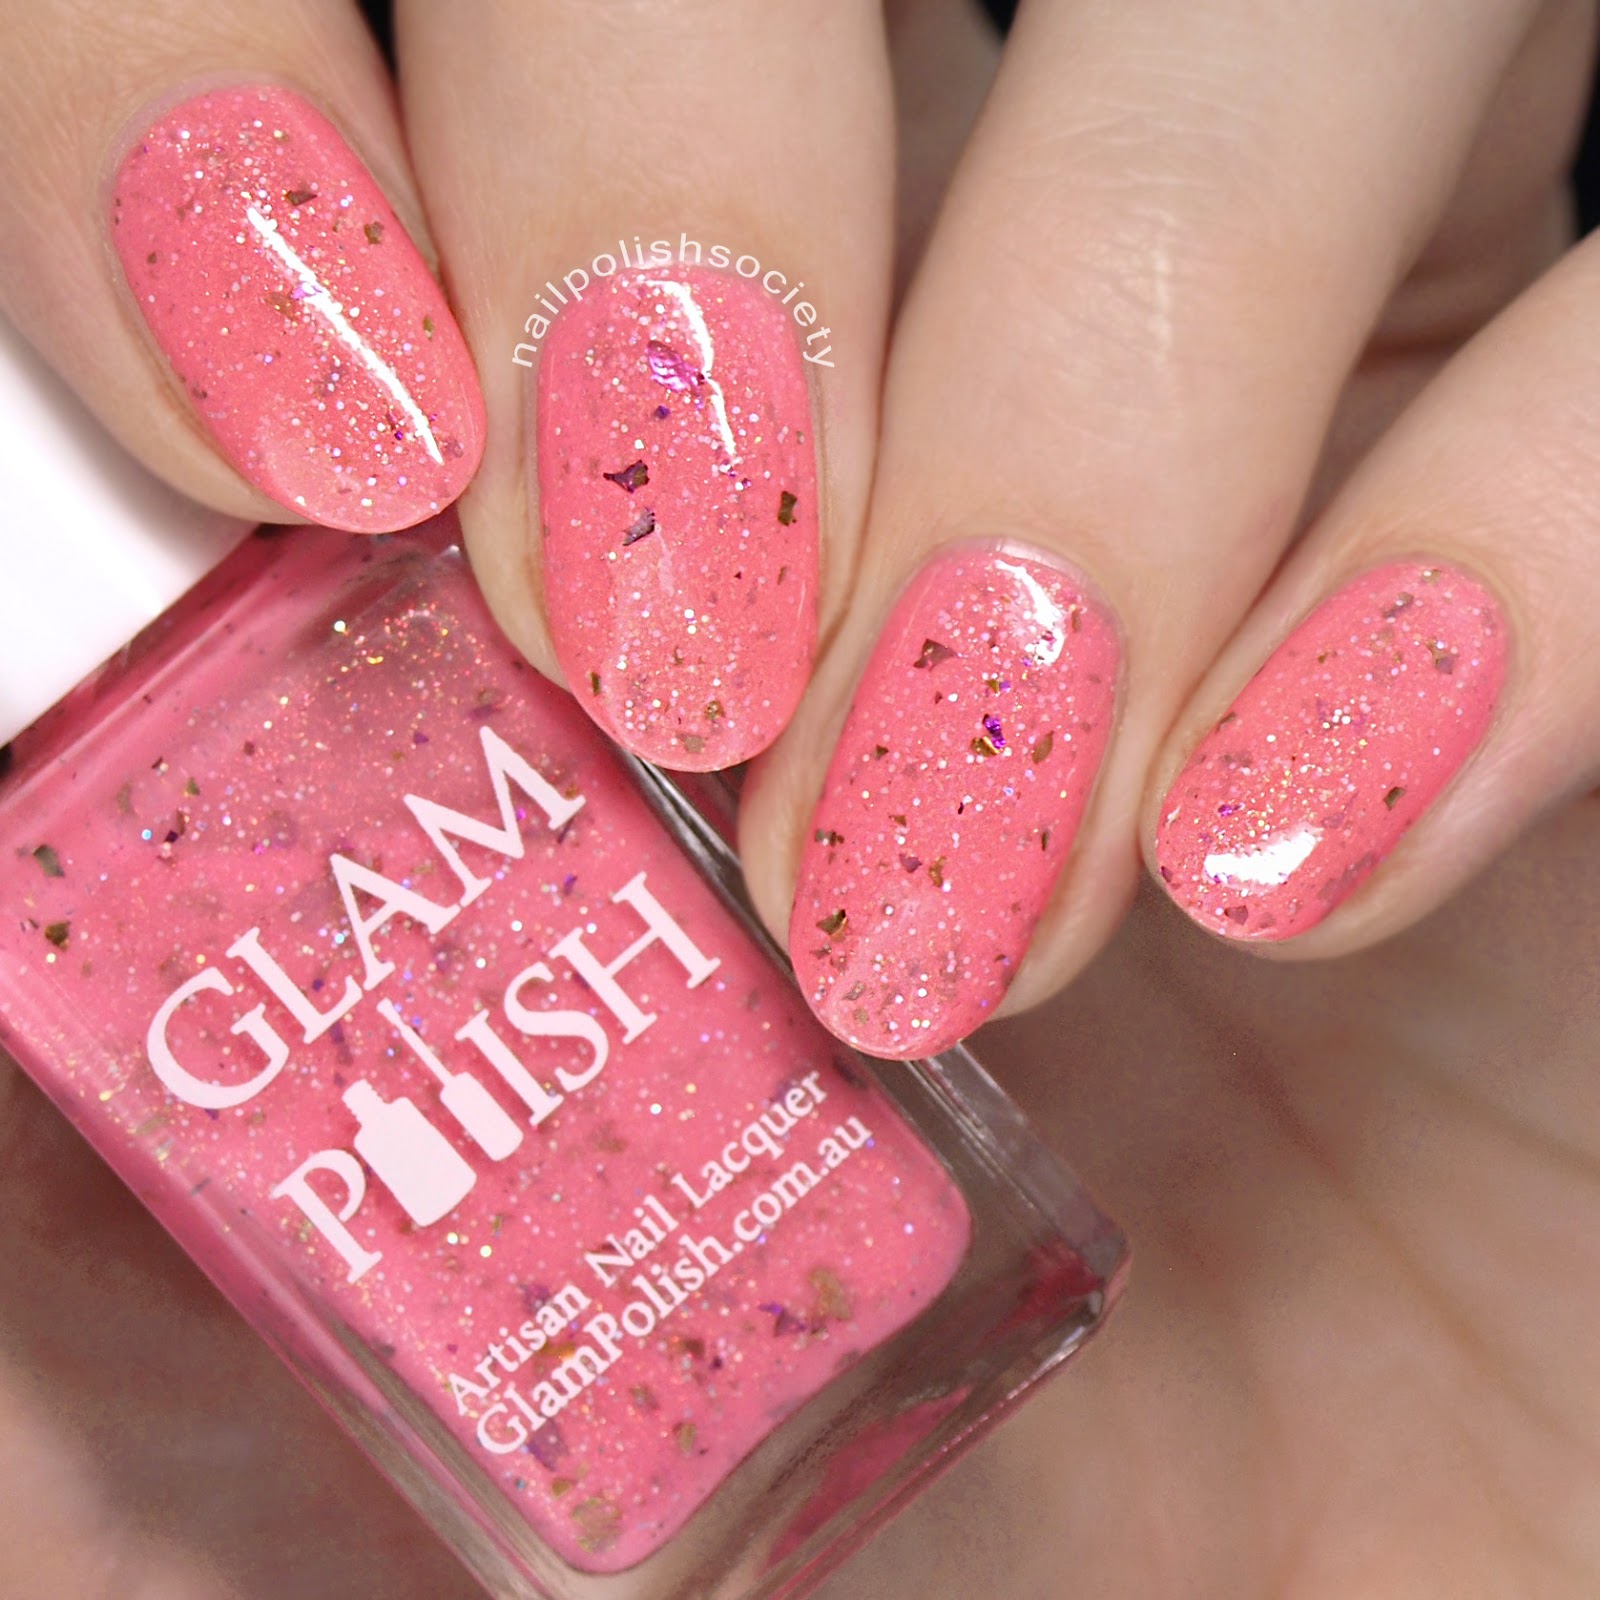 Nail Polish Society: Glam Polish You’ve Got A Friend In Me Collection ...